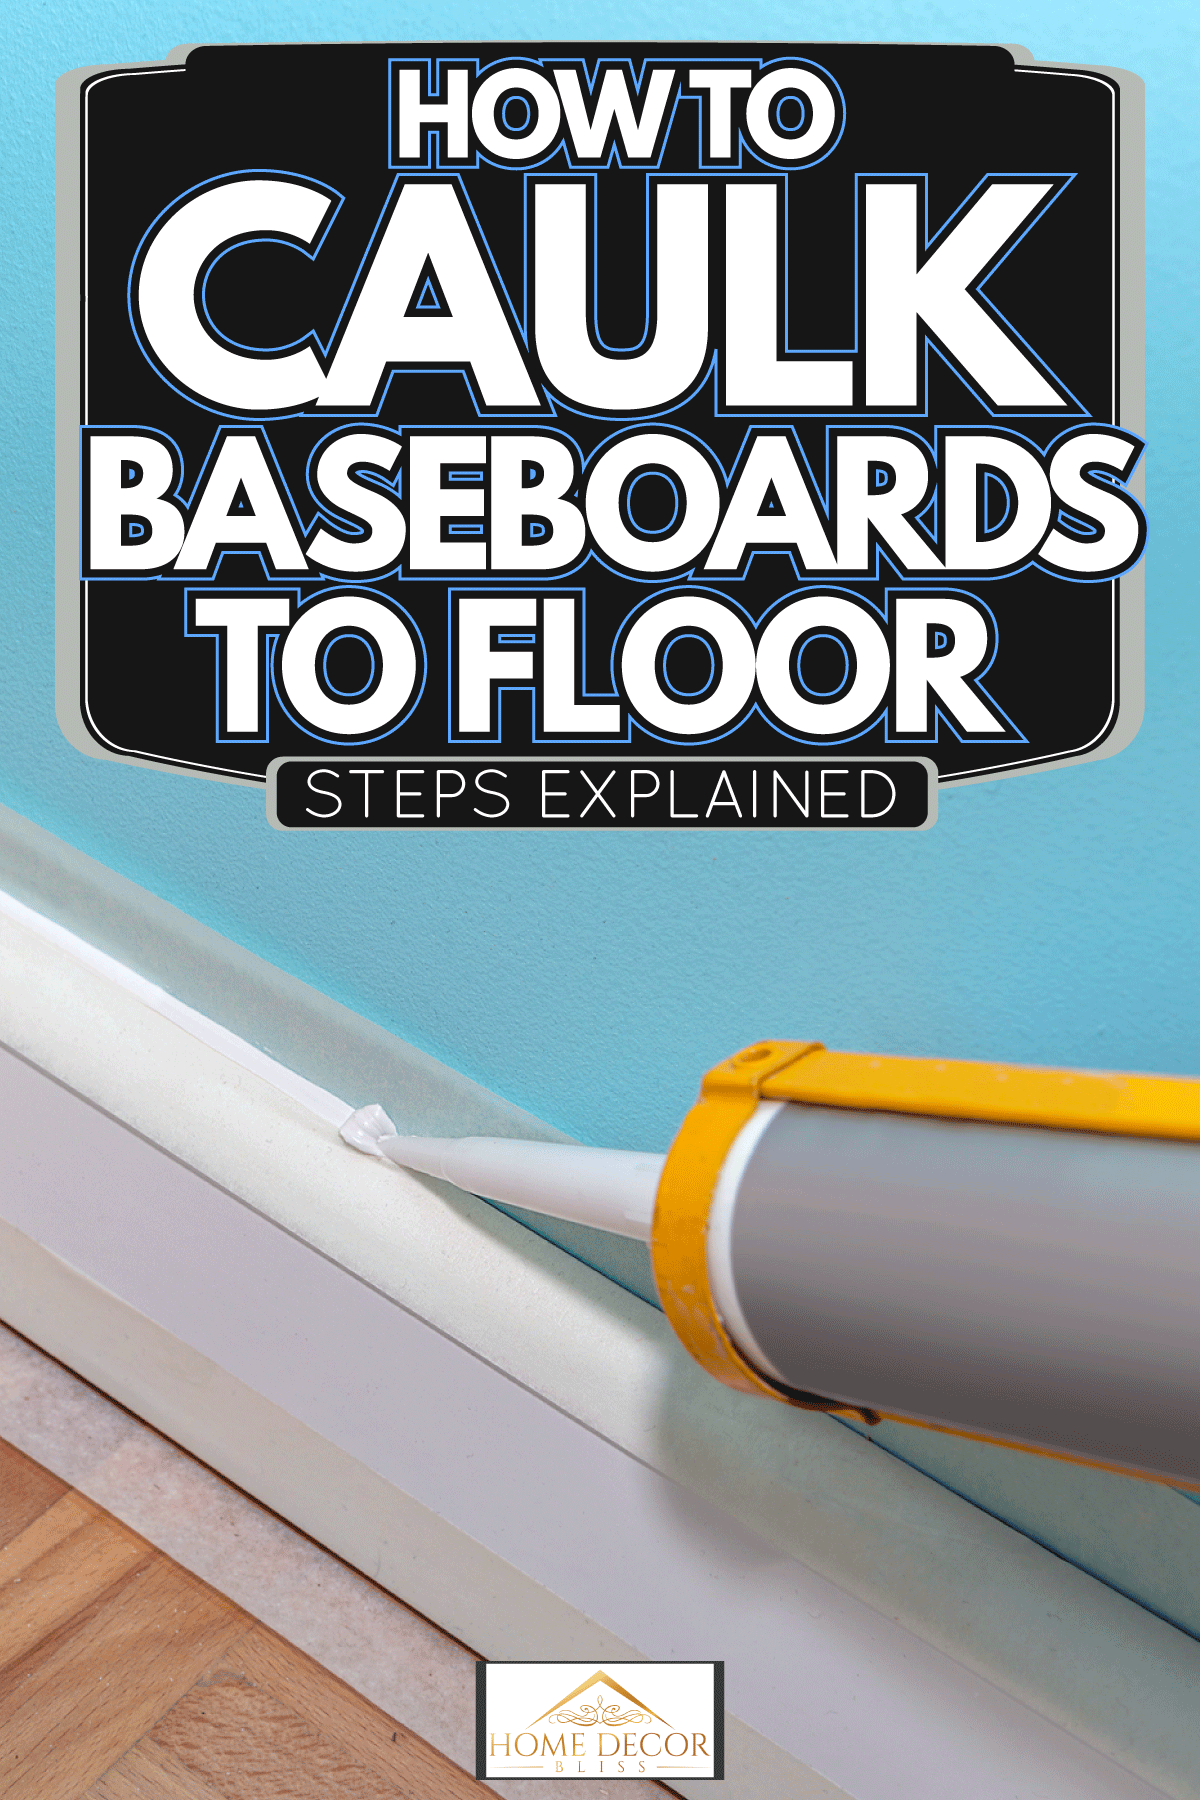 Mans hand caulk skirting board with caulking gun and silicone cartrige Filling gaps in base board using masking tape, How To Caulk Baseboards To Floor [Steps Explained]